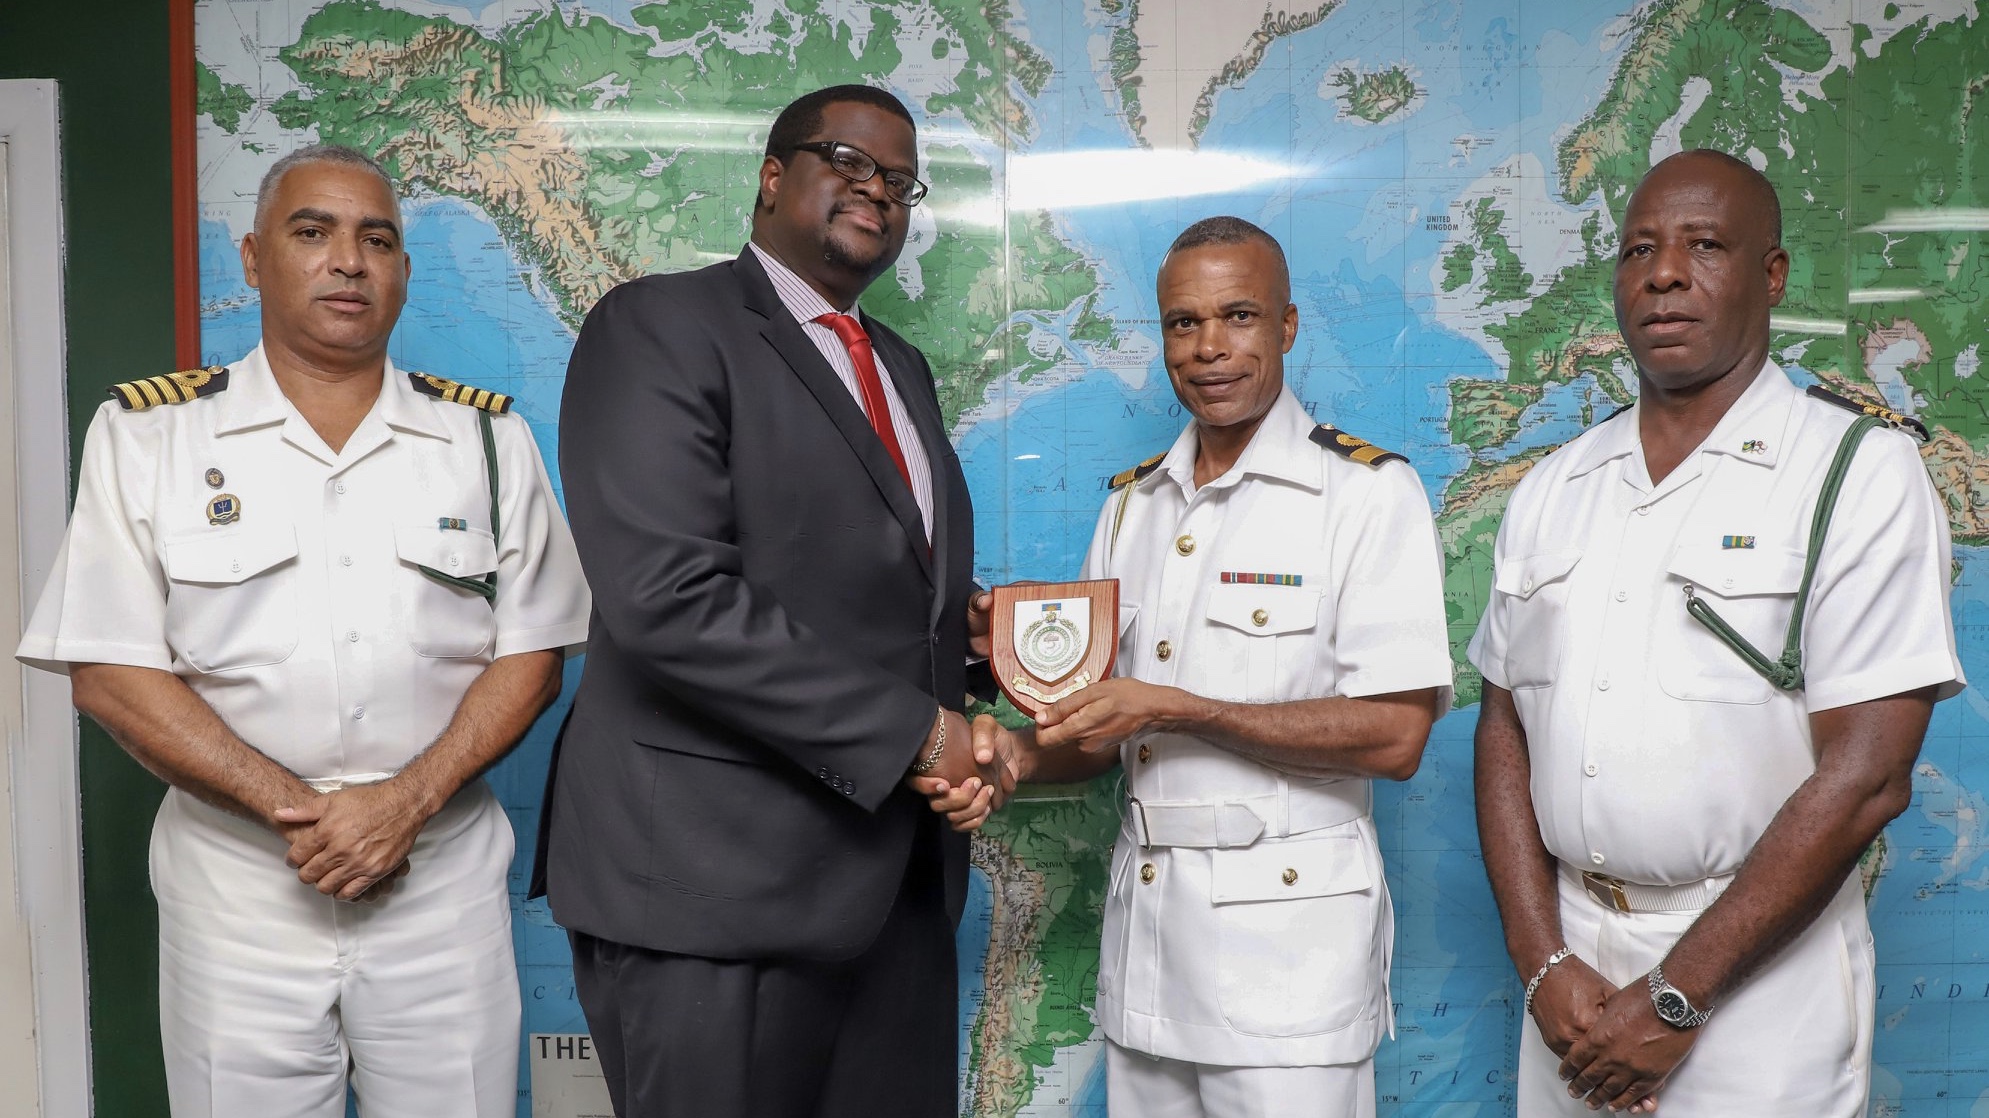 PRESIDENT OF THE BAHAMAS BAR ASSOCIATION PAYS A COURTESY CALL ON COMMANDER DEFENCE FORCE